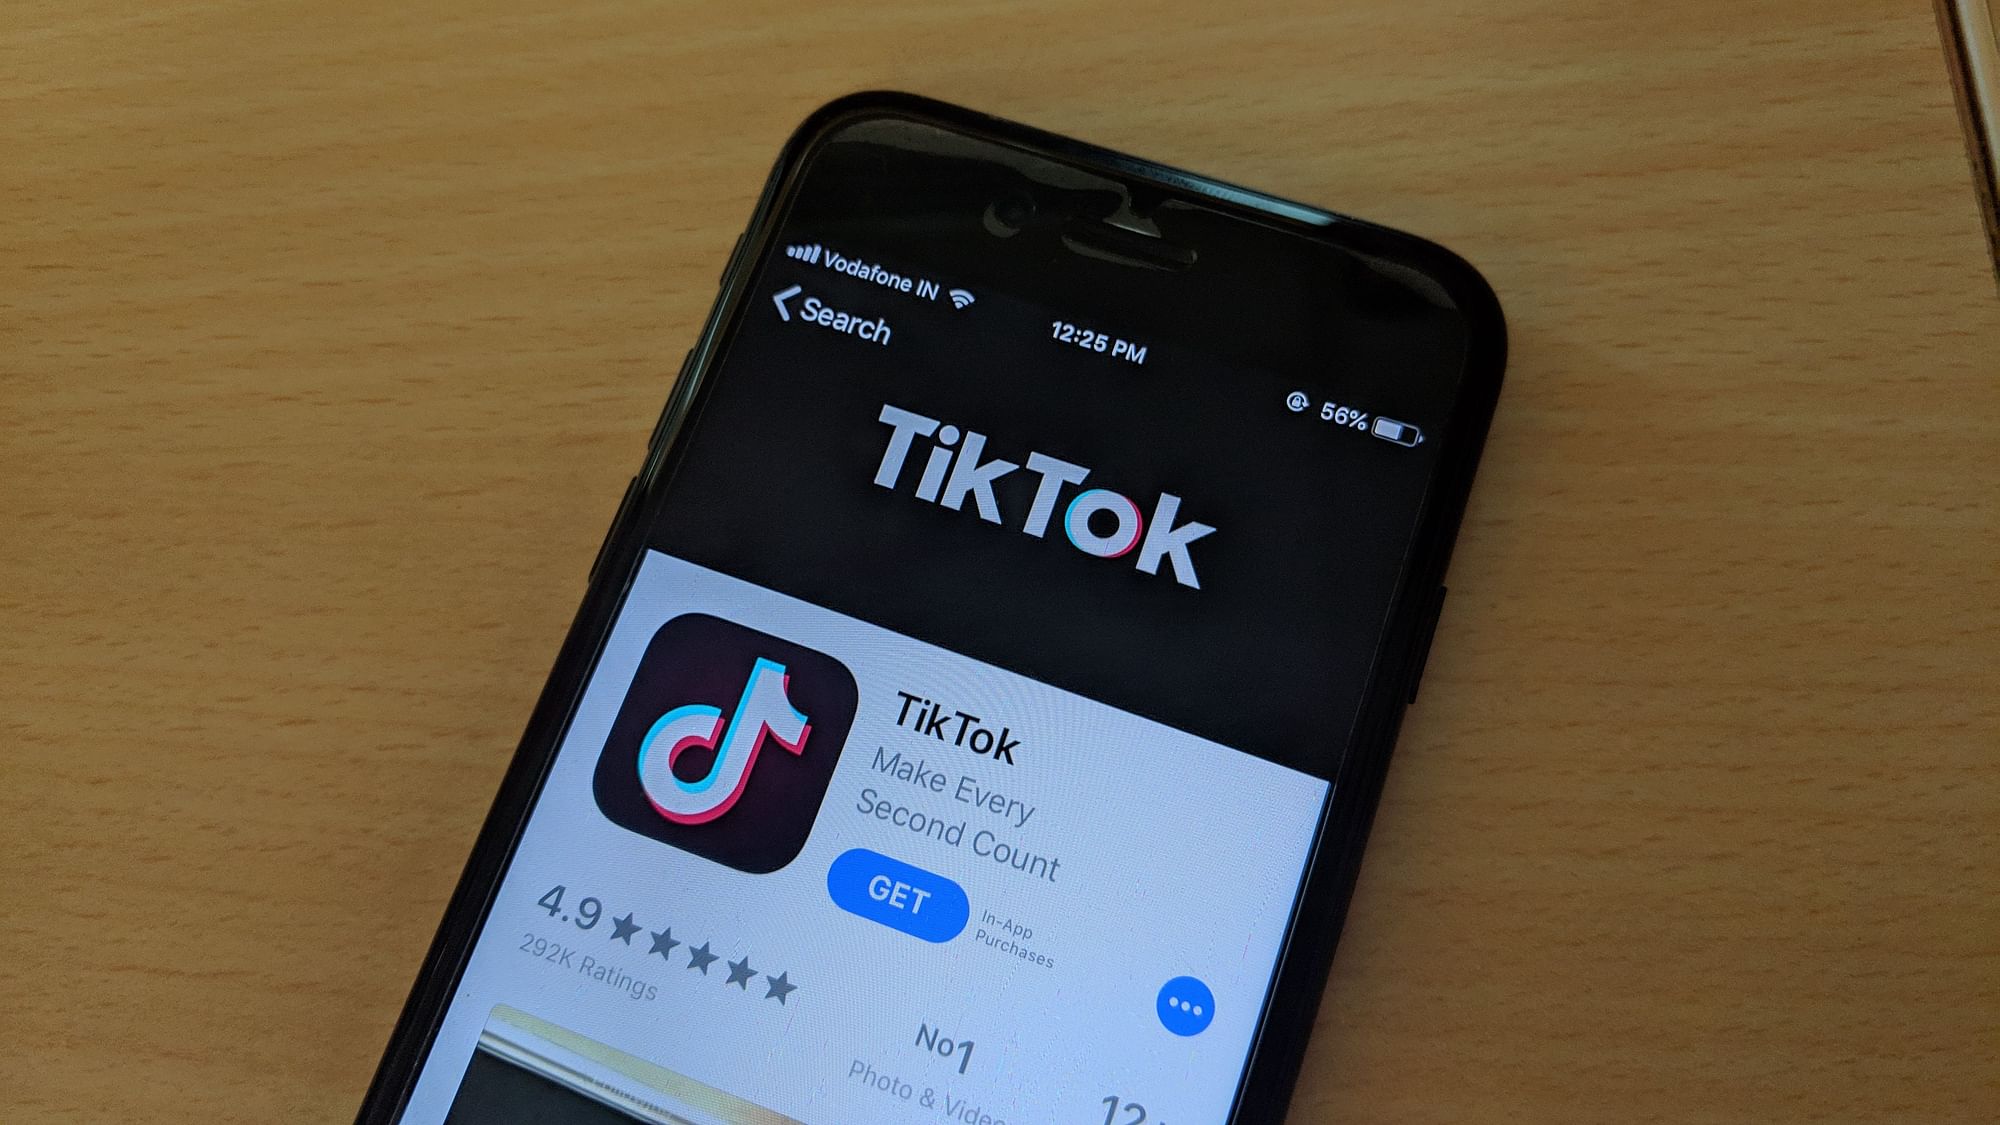 TikTok is yet to show up on app stores after its ban in India.